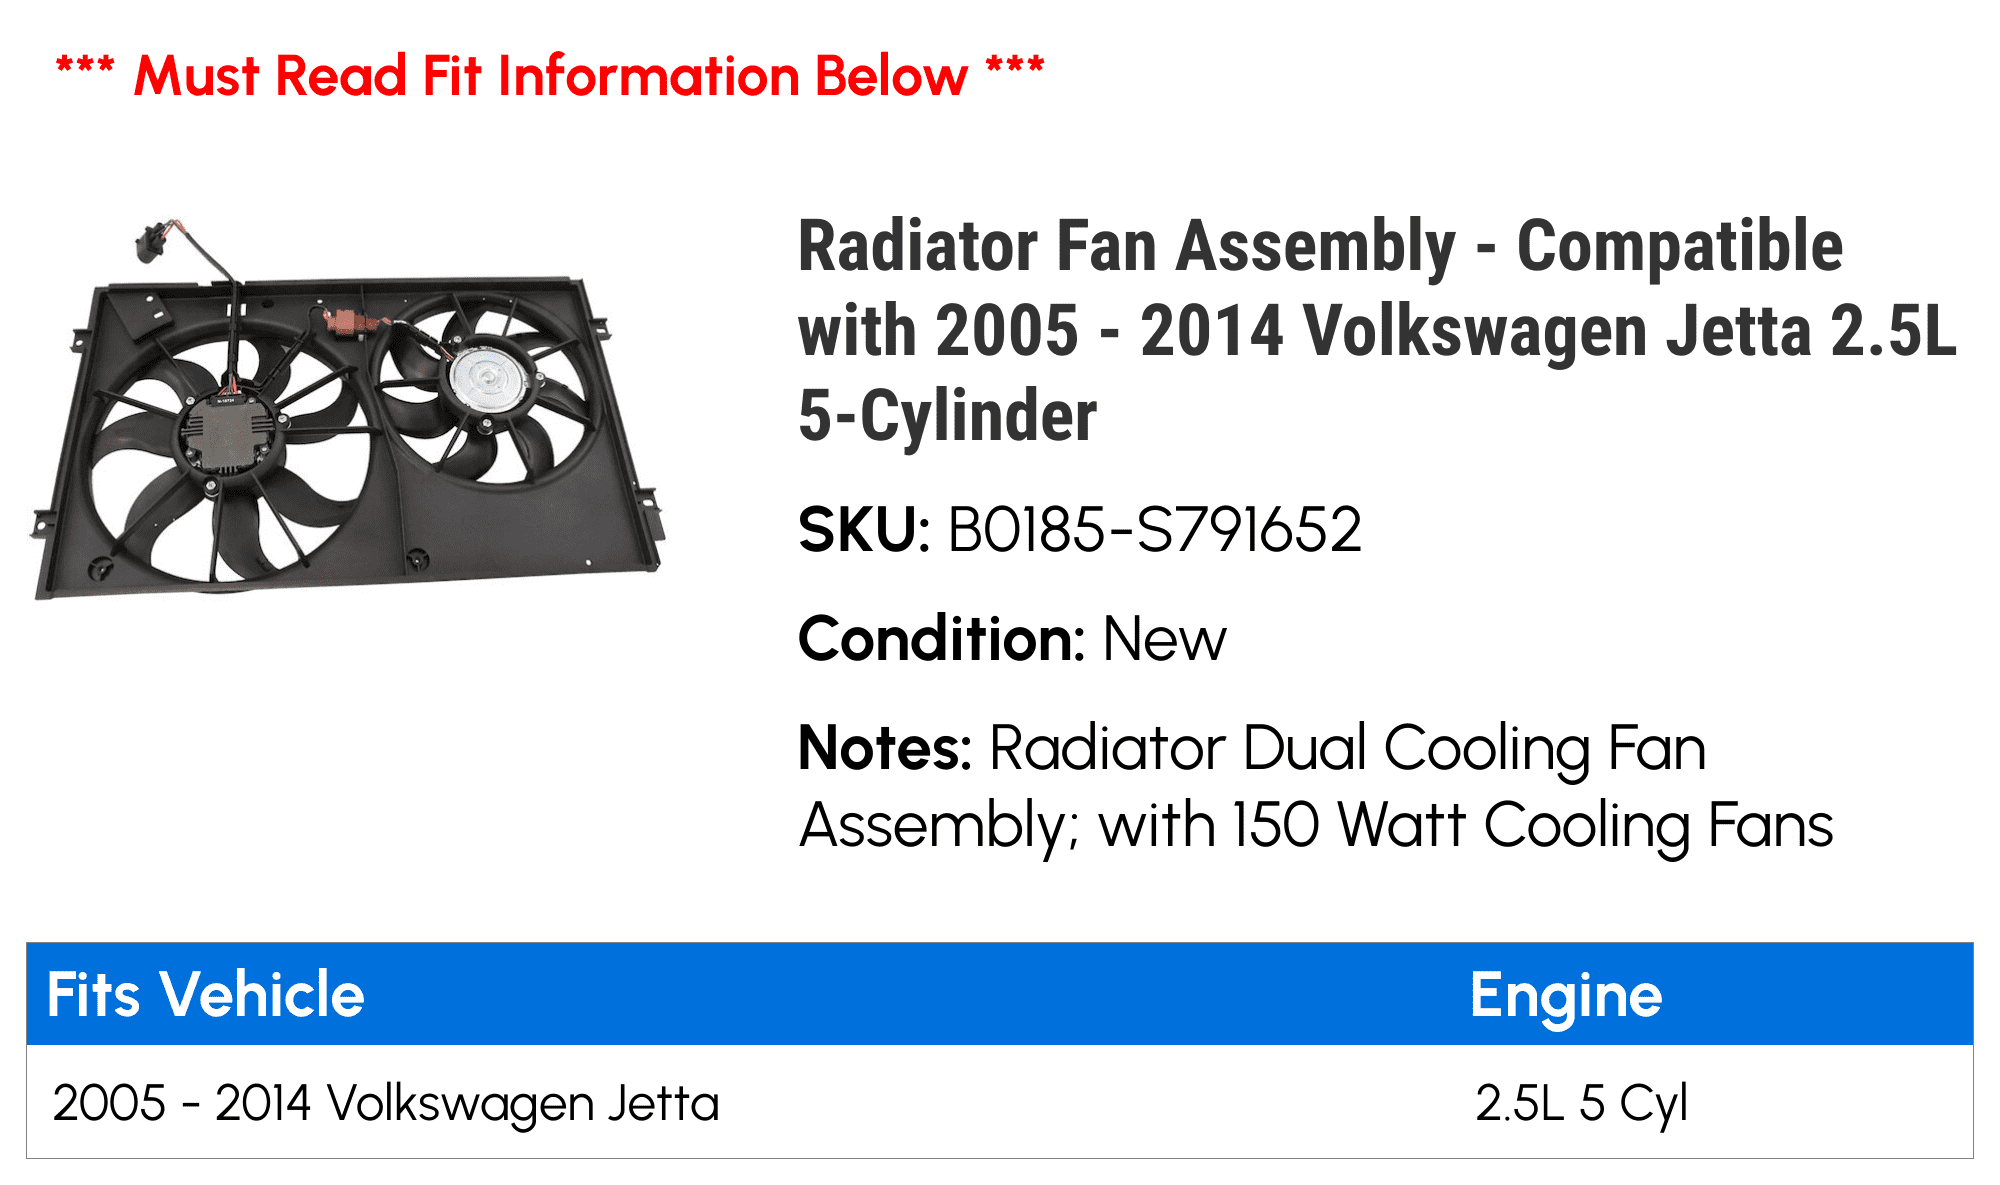 Radiator Fan Assembly - Compatible with 2005 - 2014 Volkswagen Jetta 2.5L  5-Cylinder 2006 2007 2008 2009 2010 2011 2012 2013 